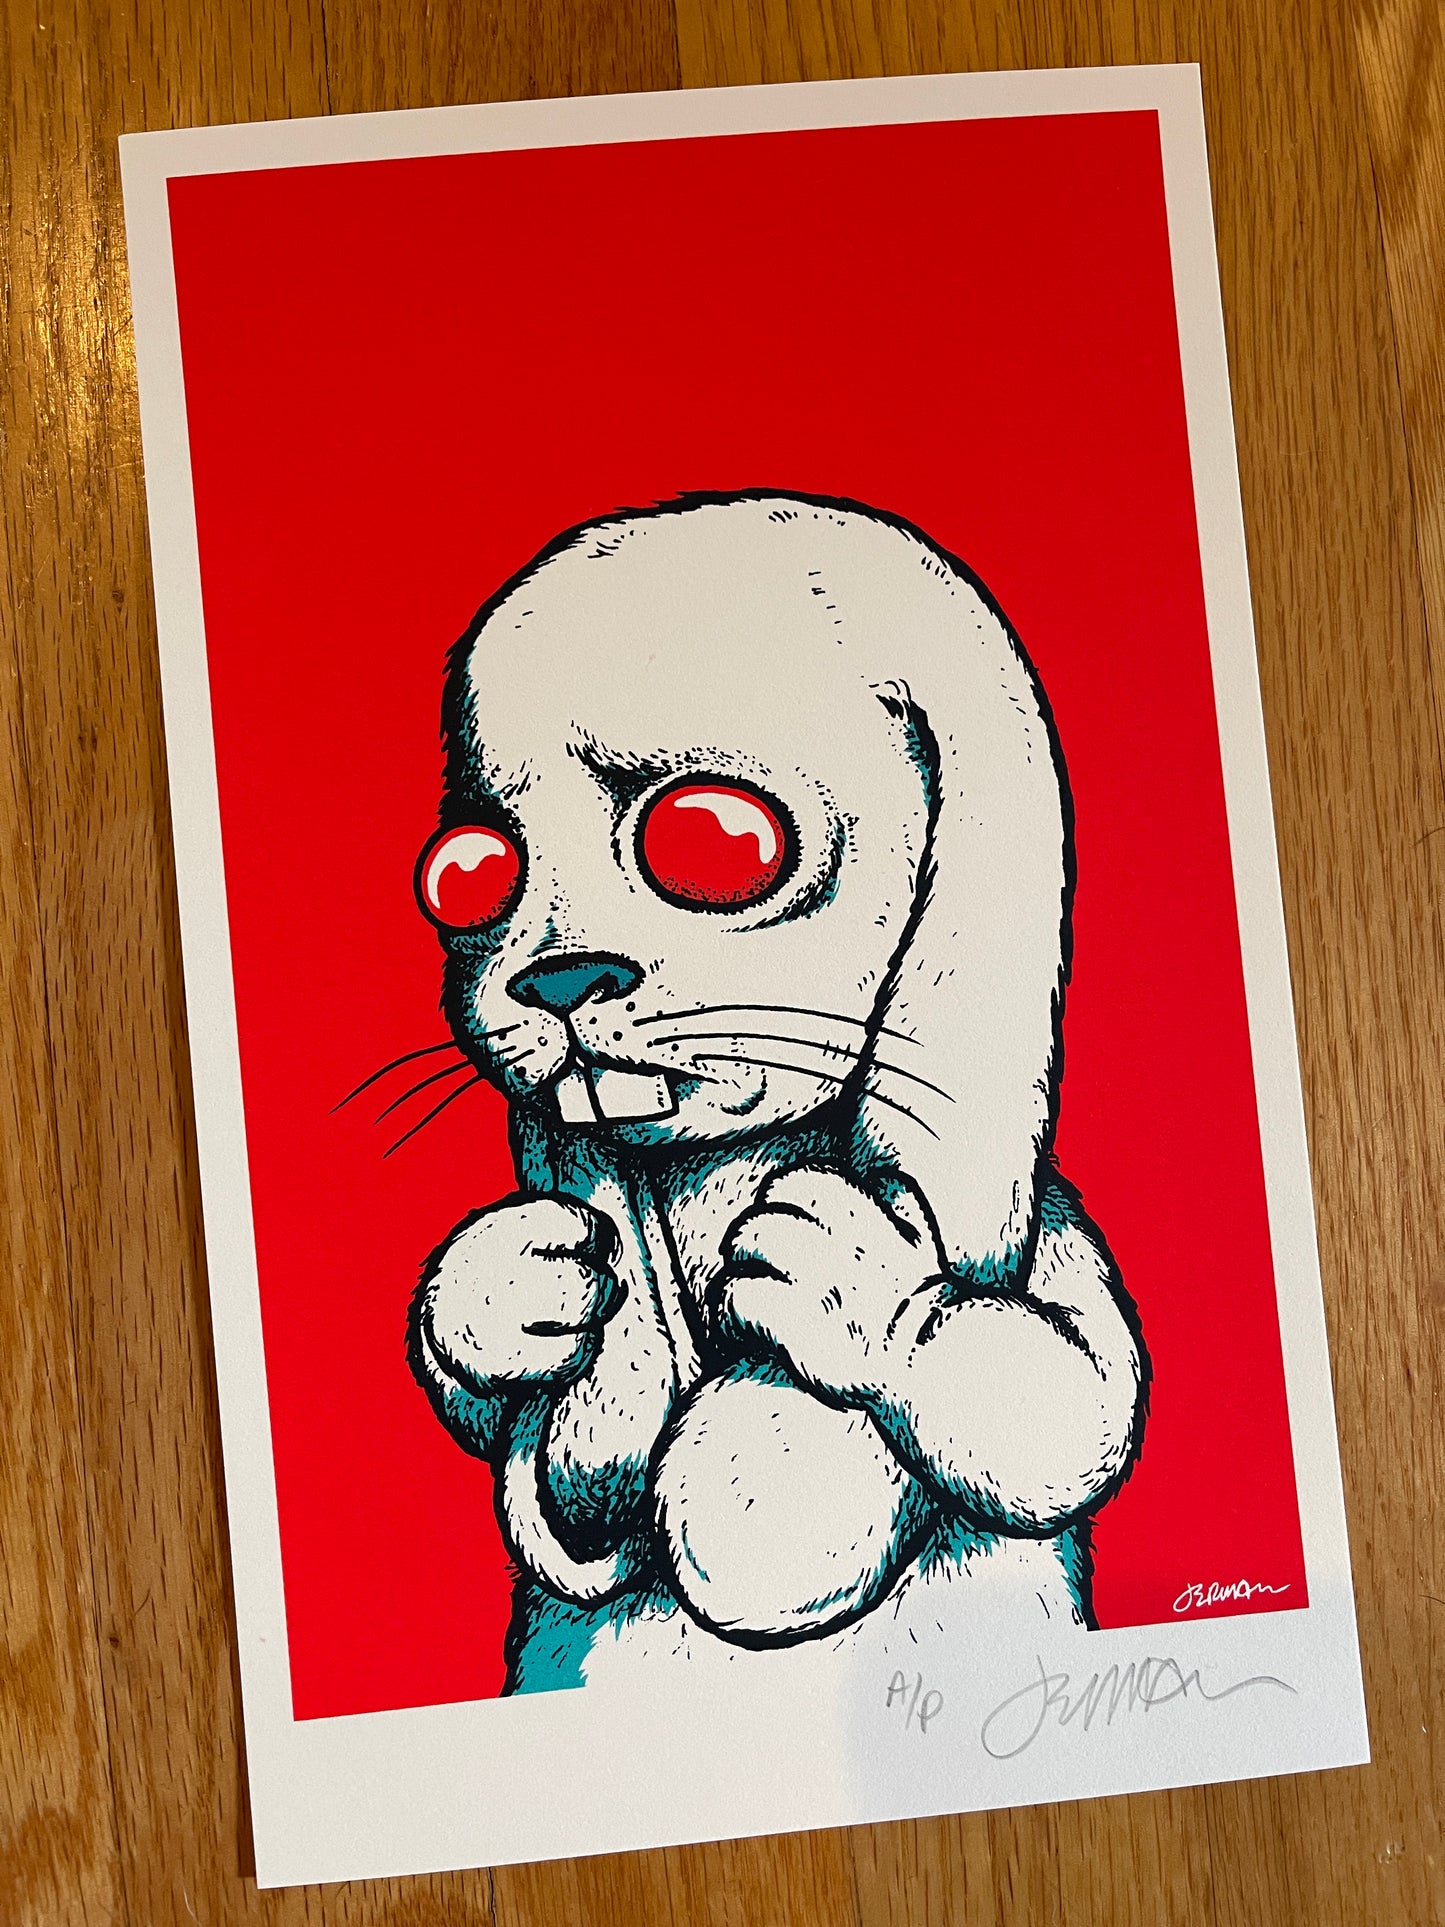 'I have to snap out of this.' MINI Art Print (Gallery Cotton & Lava Foil Editions)